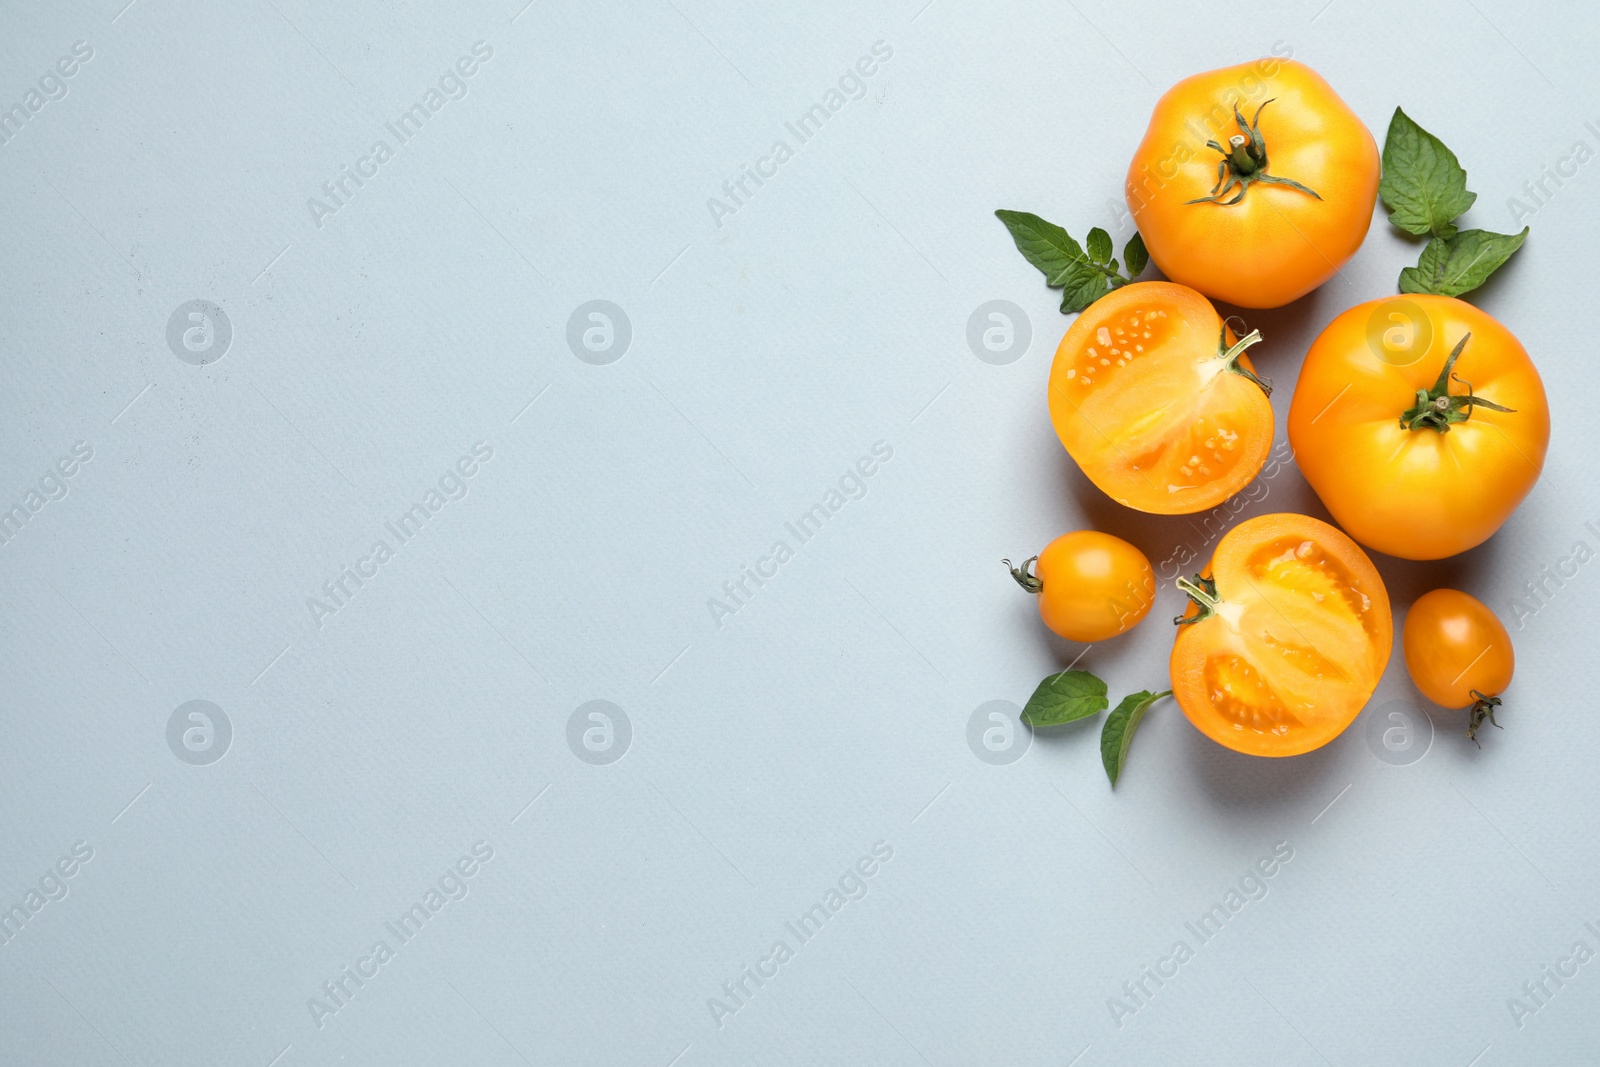 Photo of Cut and whole ripe yellow tomatoes with leaves on light background, flat lay. Space for text